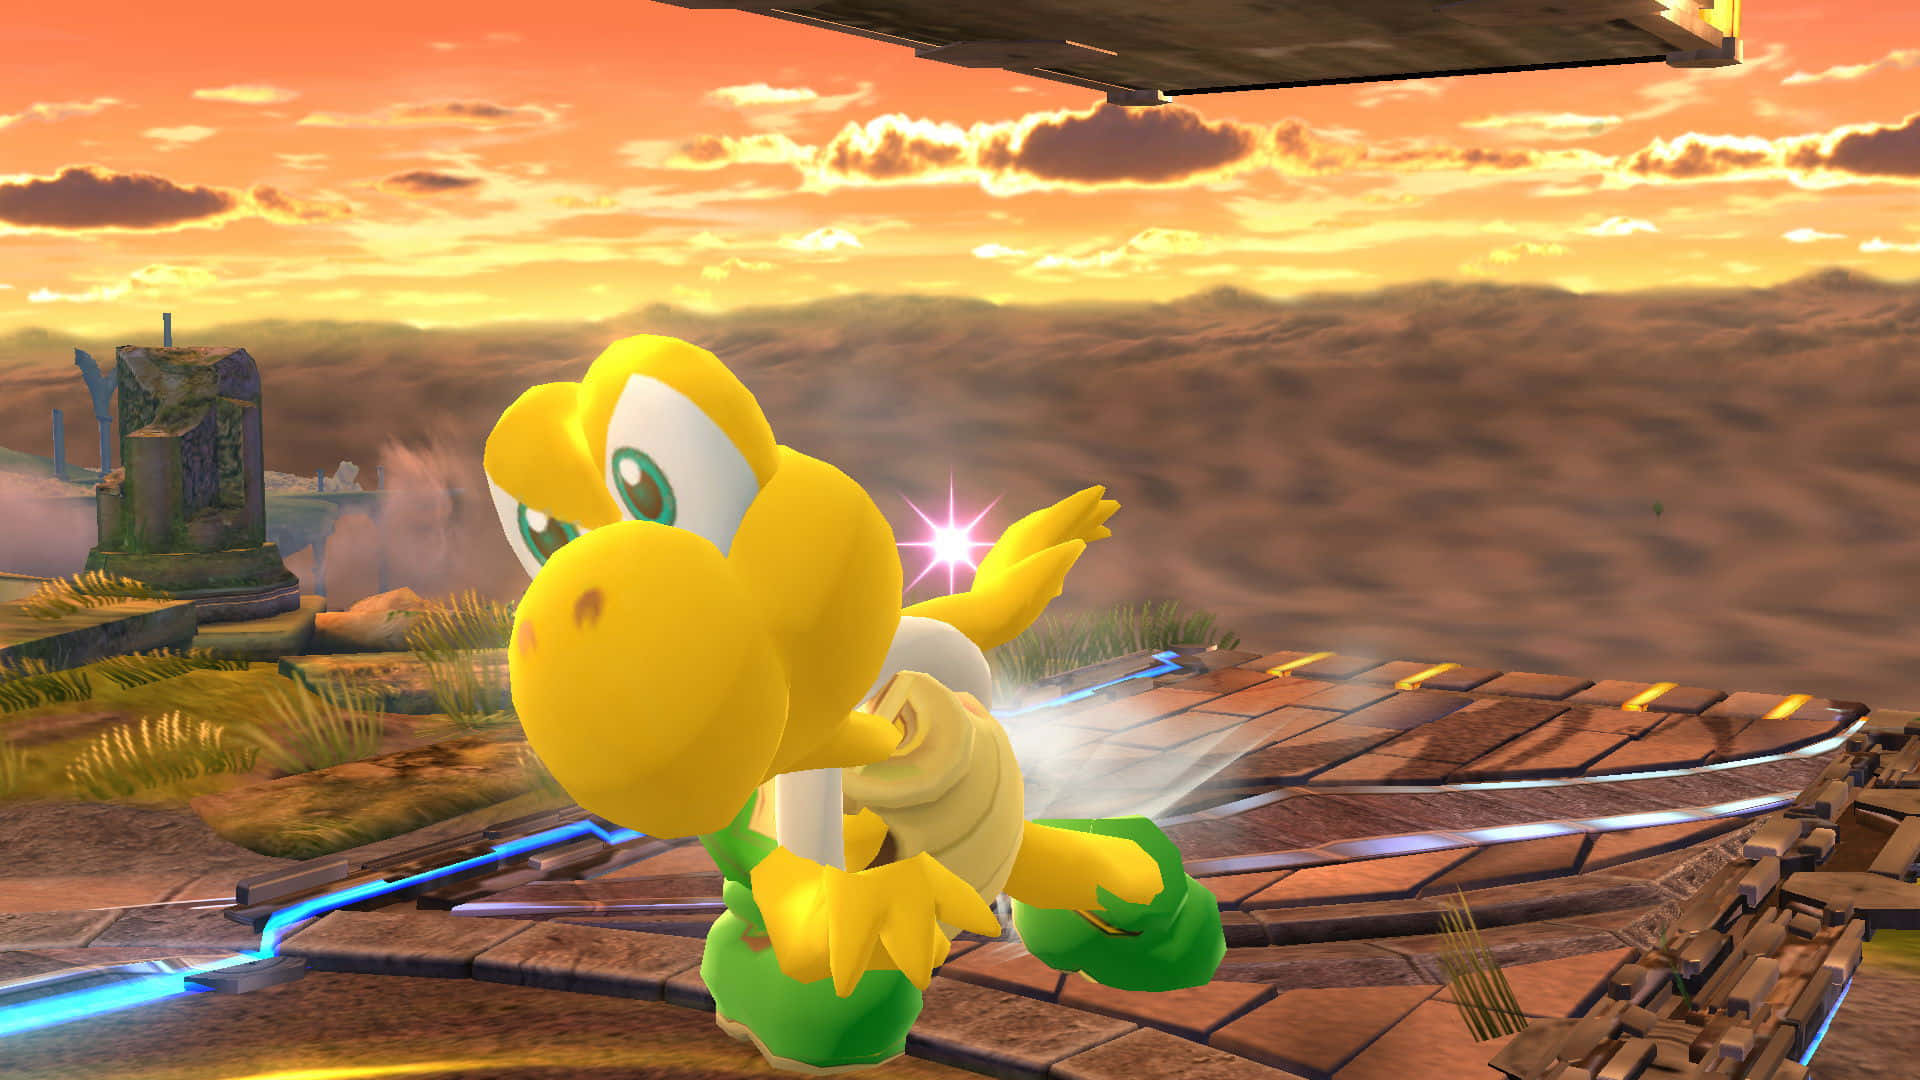 Koopa Troopa marching in style on a vibrant background Wallpaper